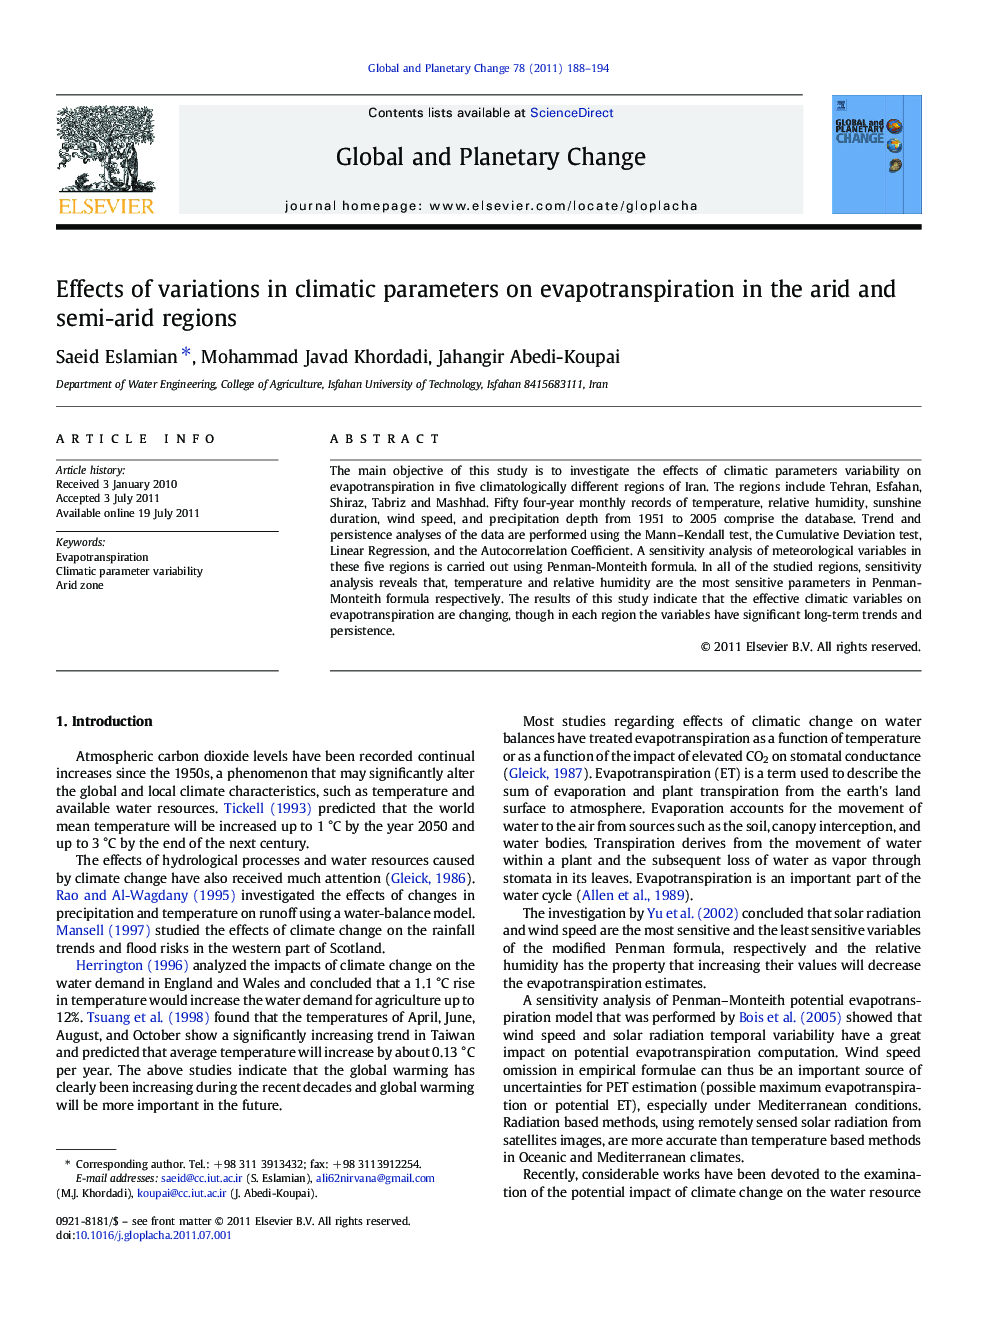 Effects of variations in climatic parameters on evapotranspiration in the arid and semi-arid regions